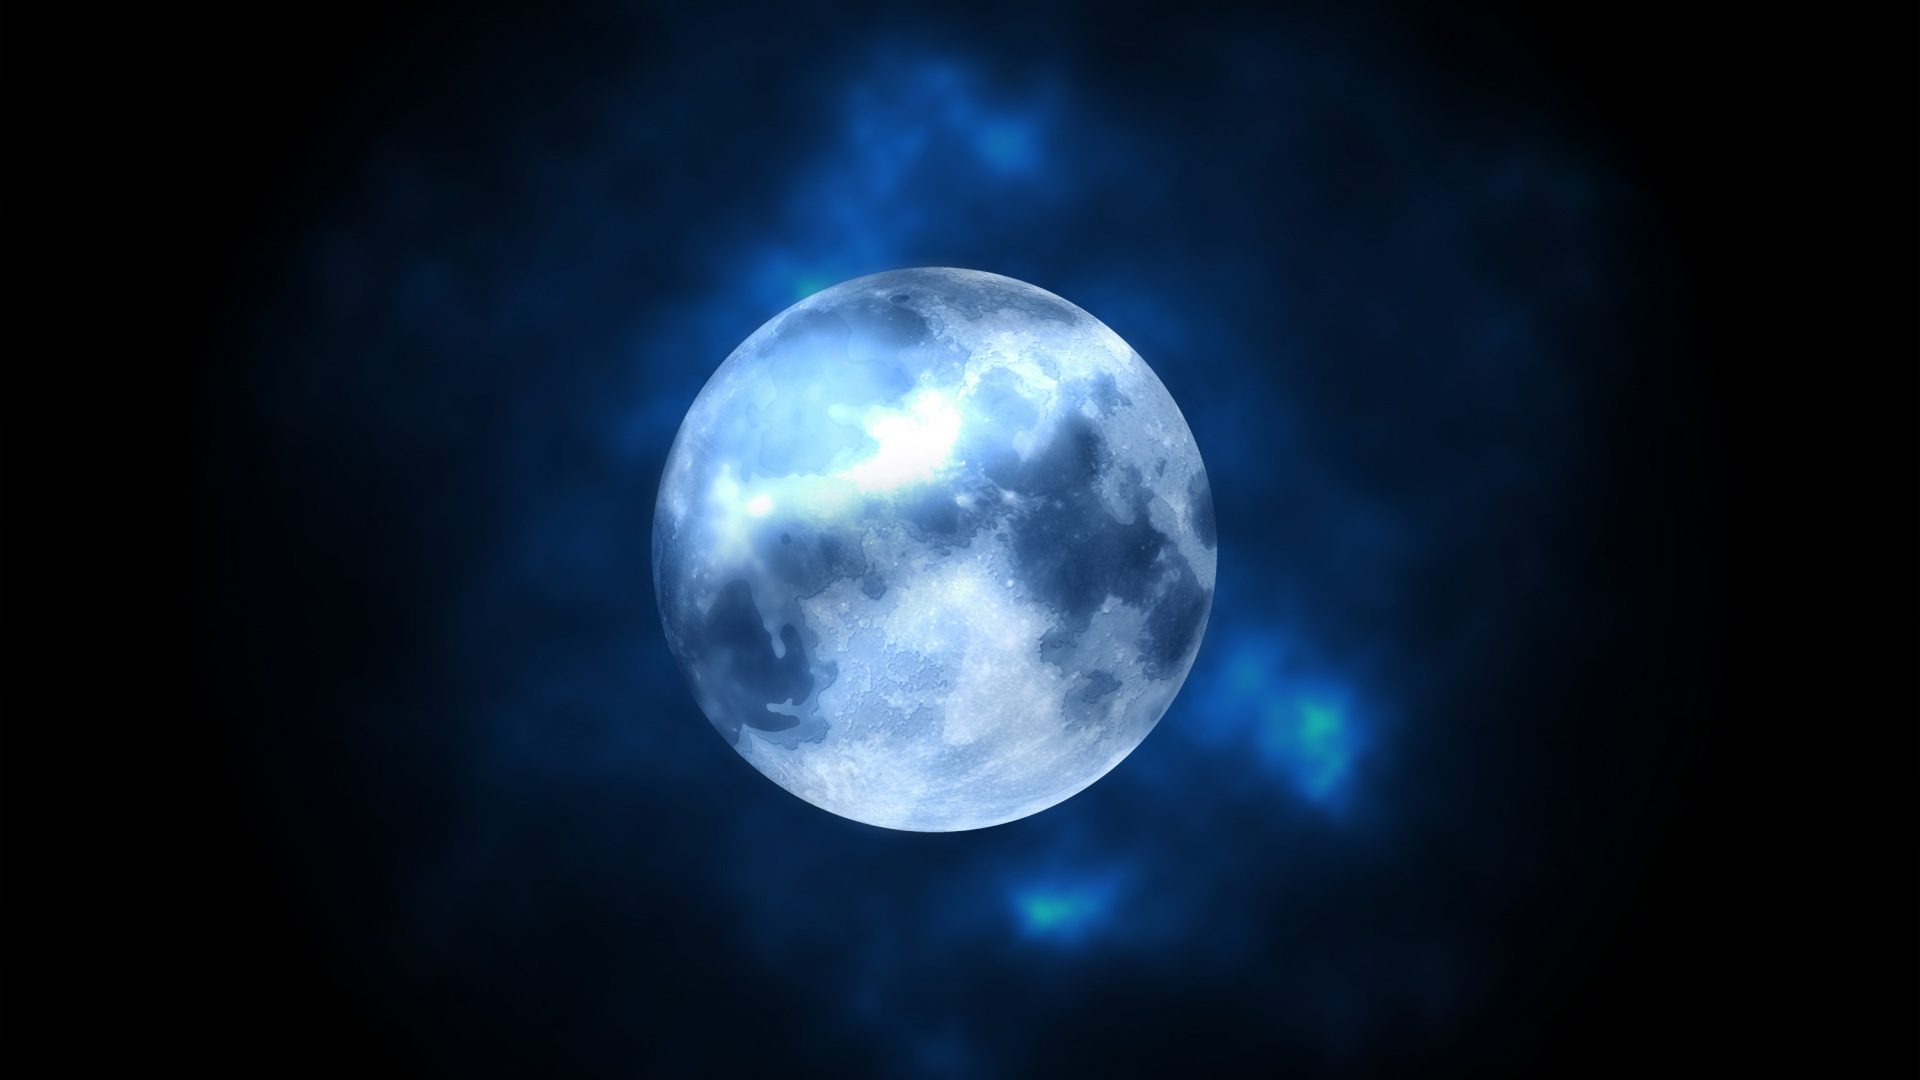 Blue and White Moon Illustration. Wallpaper in 1920x1080 Resolution